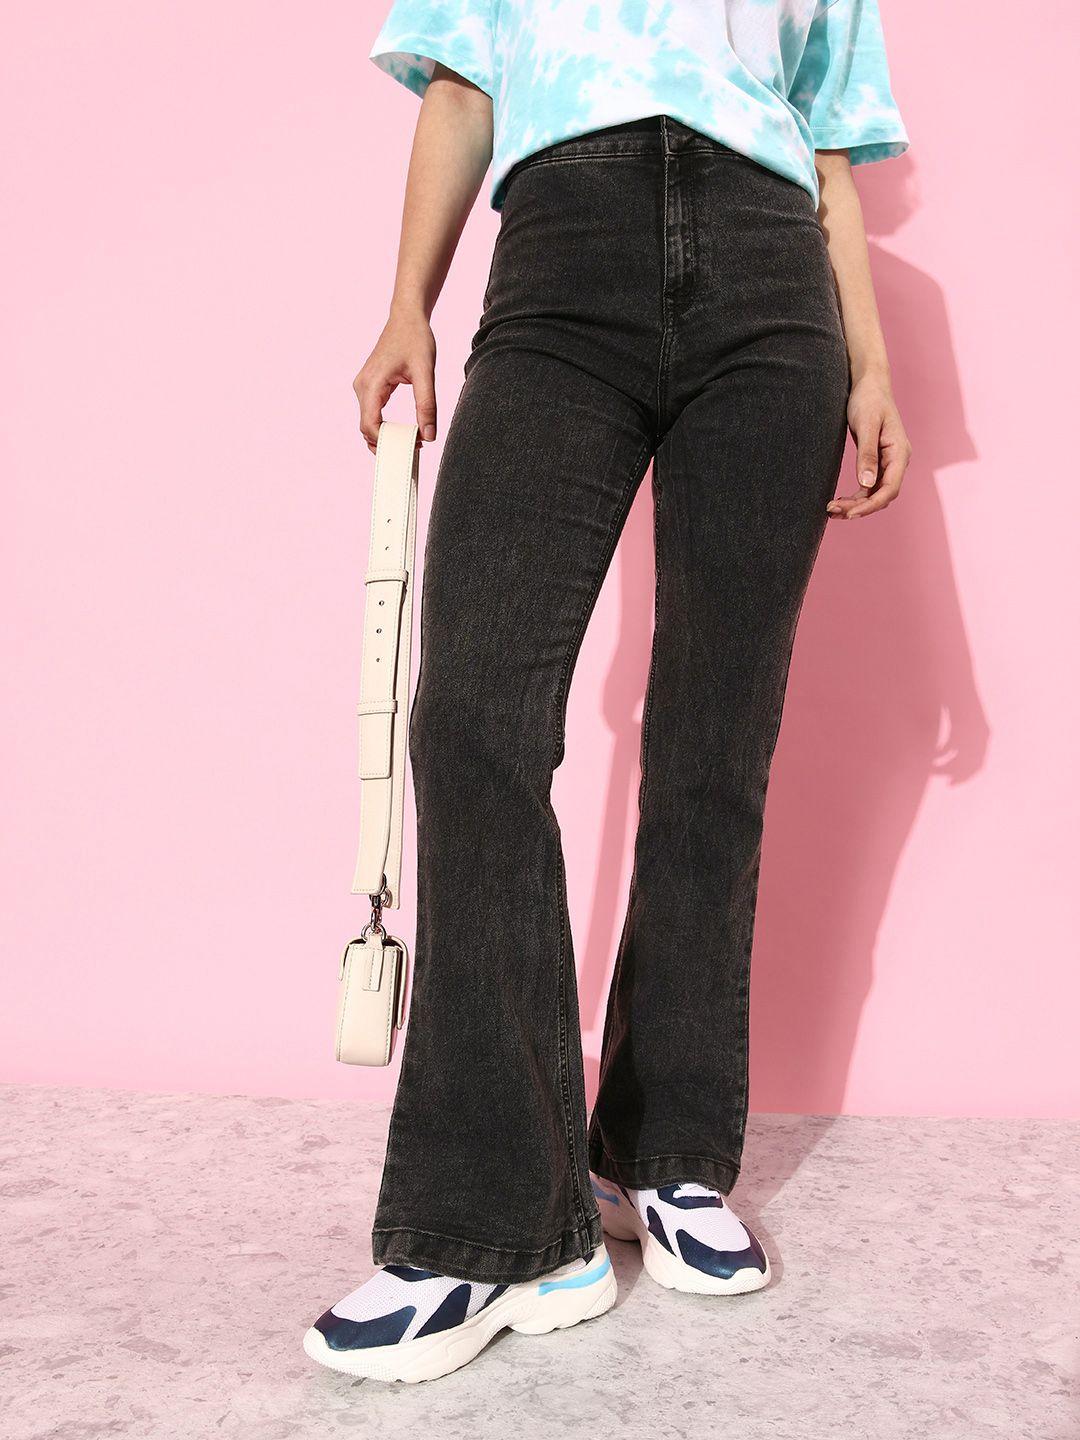 the-roadster-life-co.-women-jet-black-vacay-chill-rodeo-bootcuts-high-rise-denim-jeggings